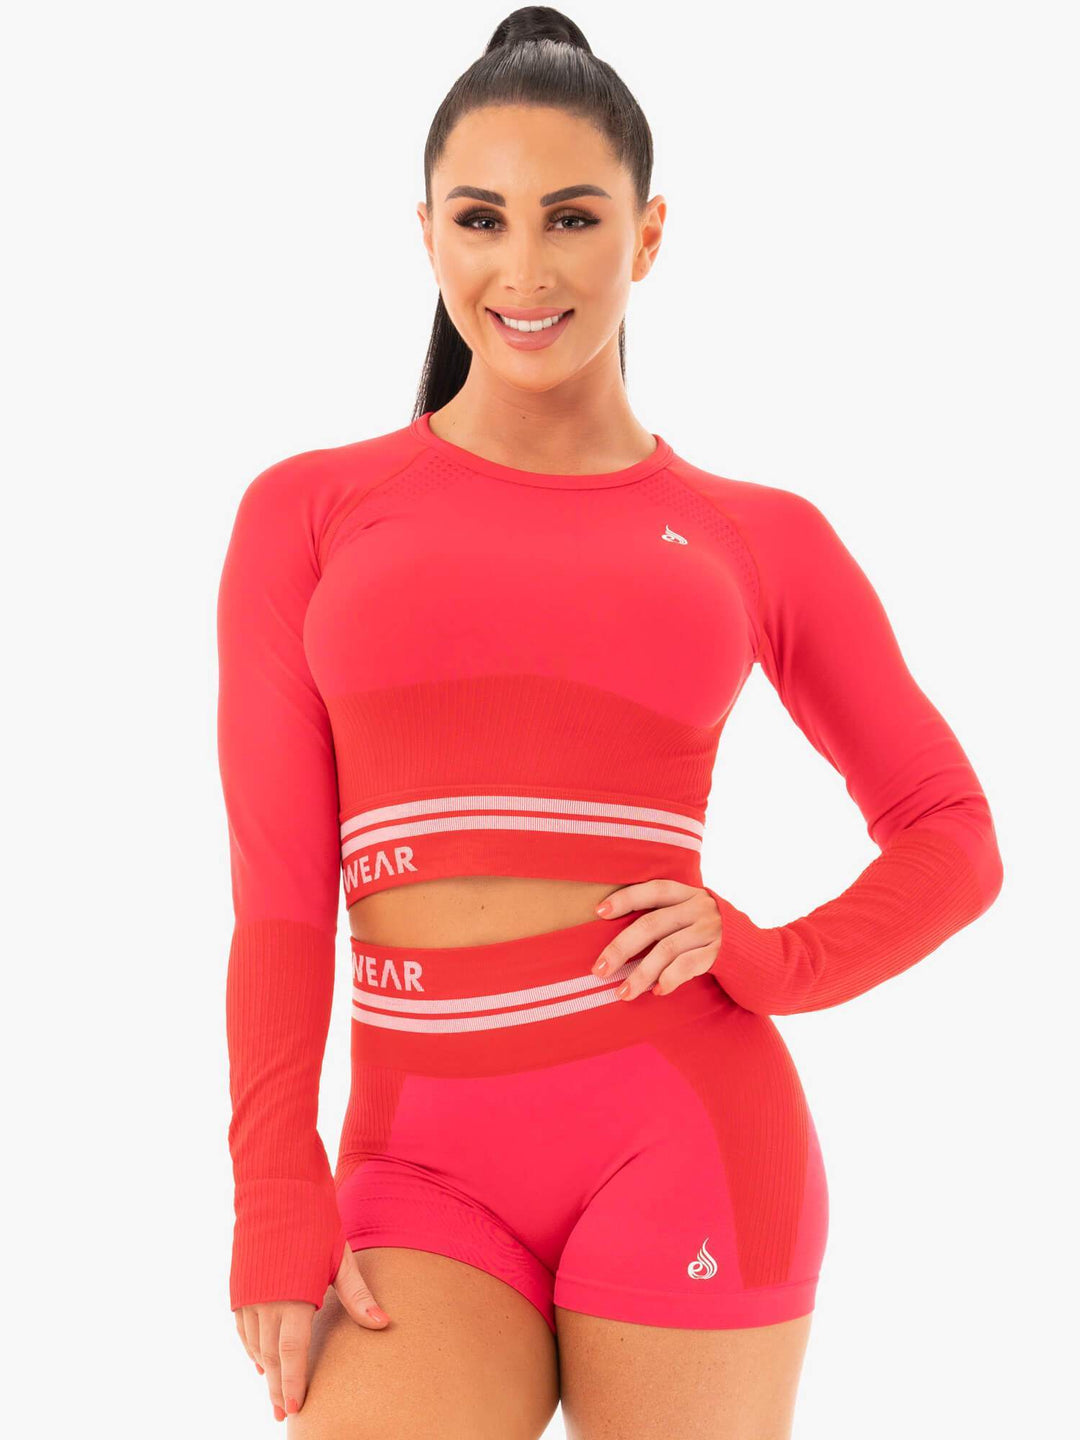 Freestyle Seamless Long Sleeve Crop - Red Clothing Ryderwear 